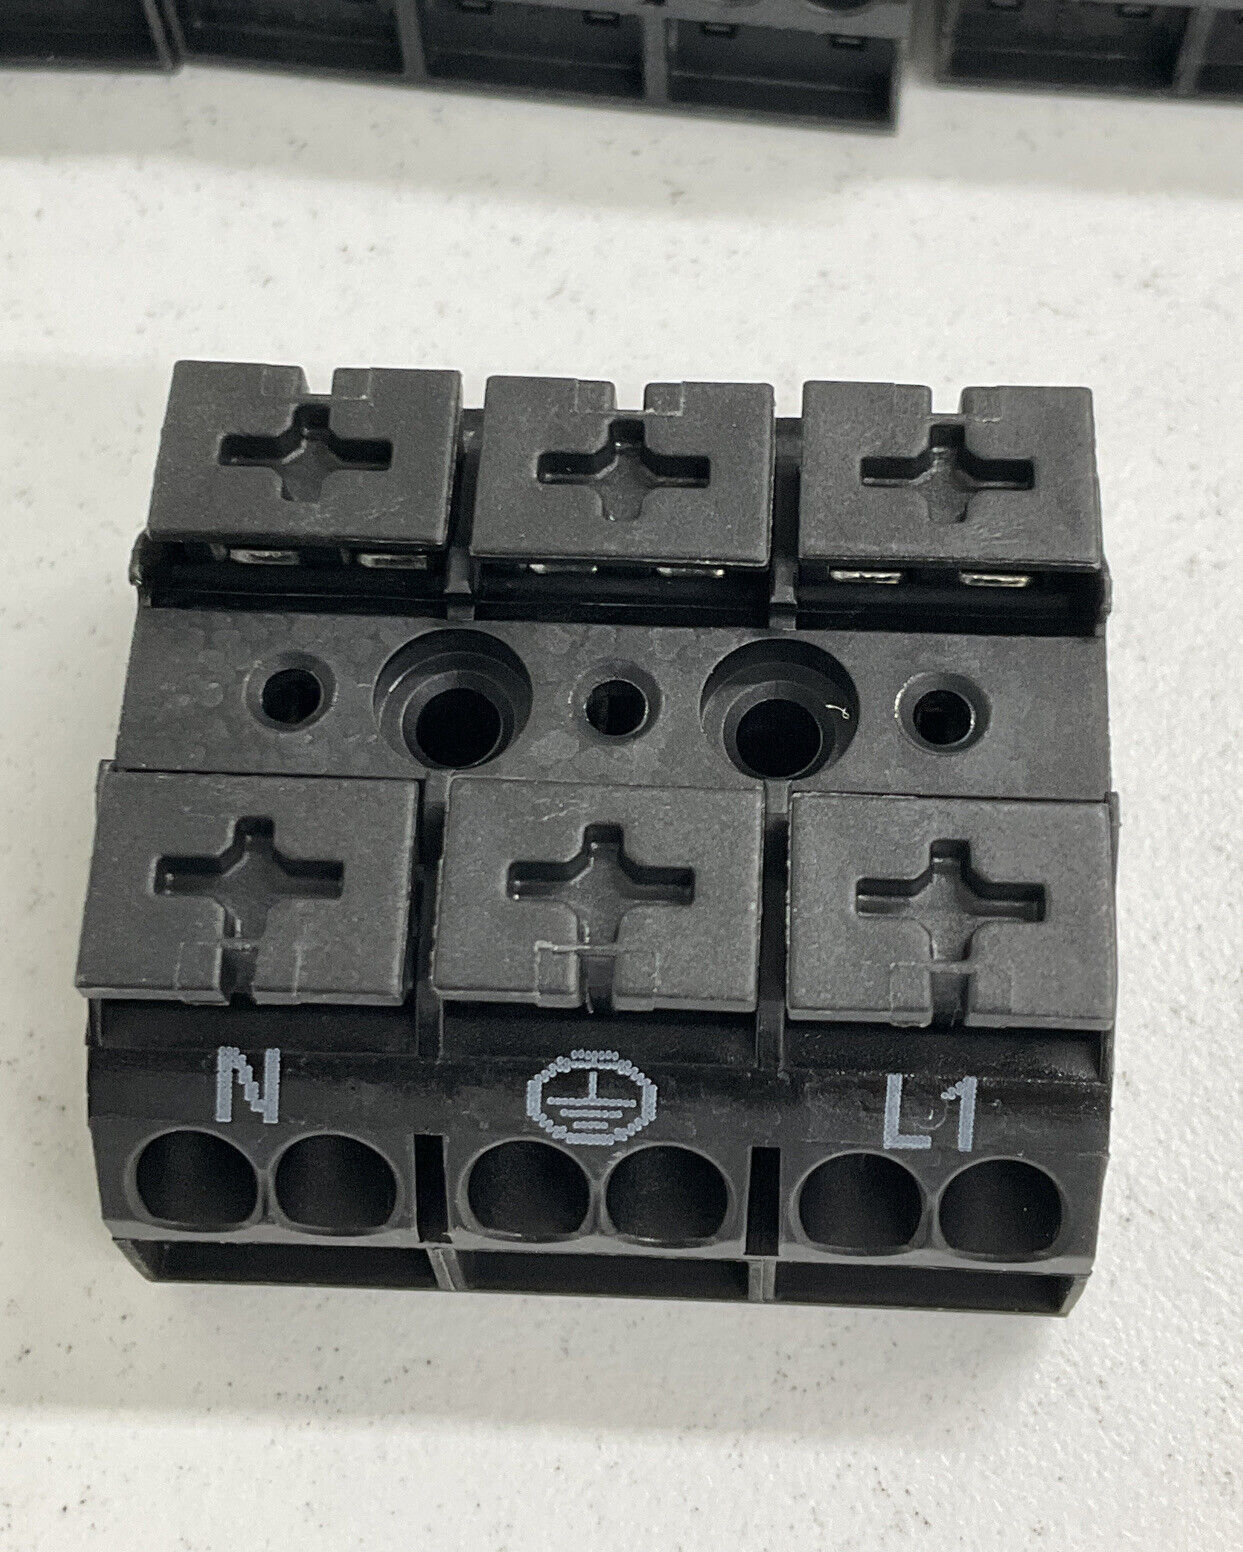 Wago 862-2503 4 Pole Chassis Mount Terminal Block Awg 20-12 10 Pieces (OV121) - 0